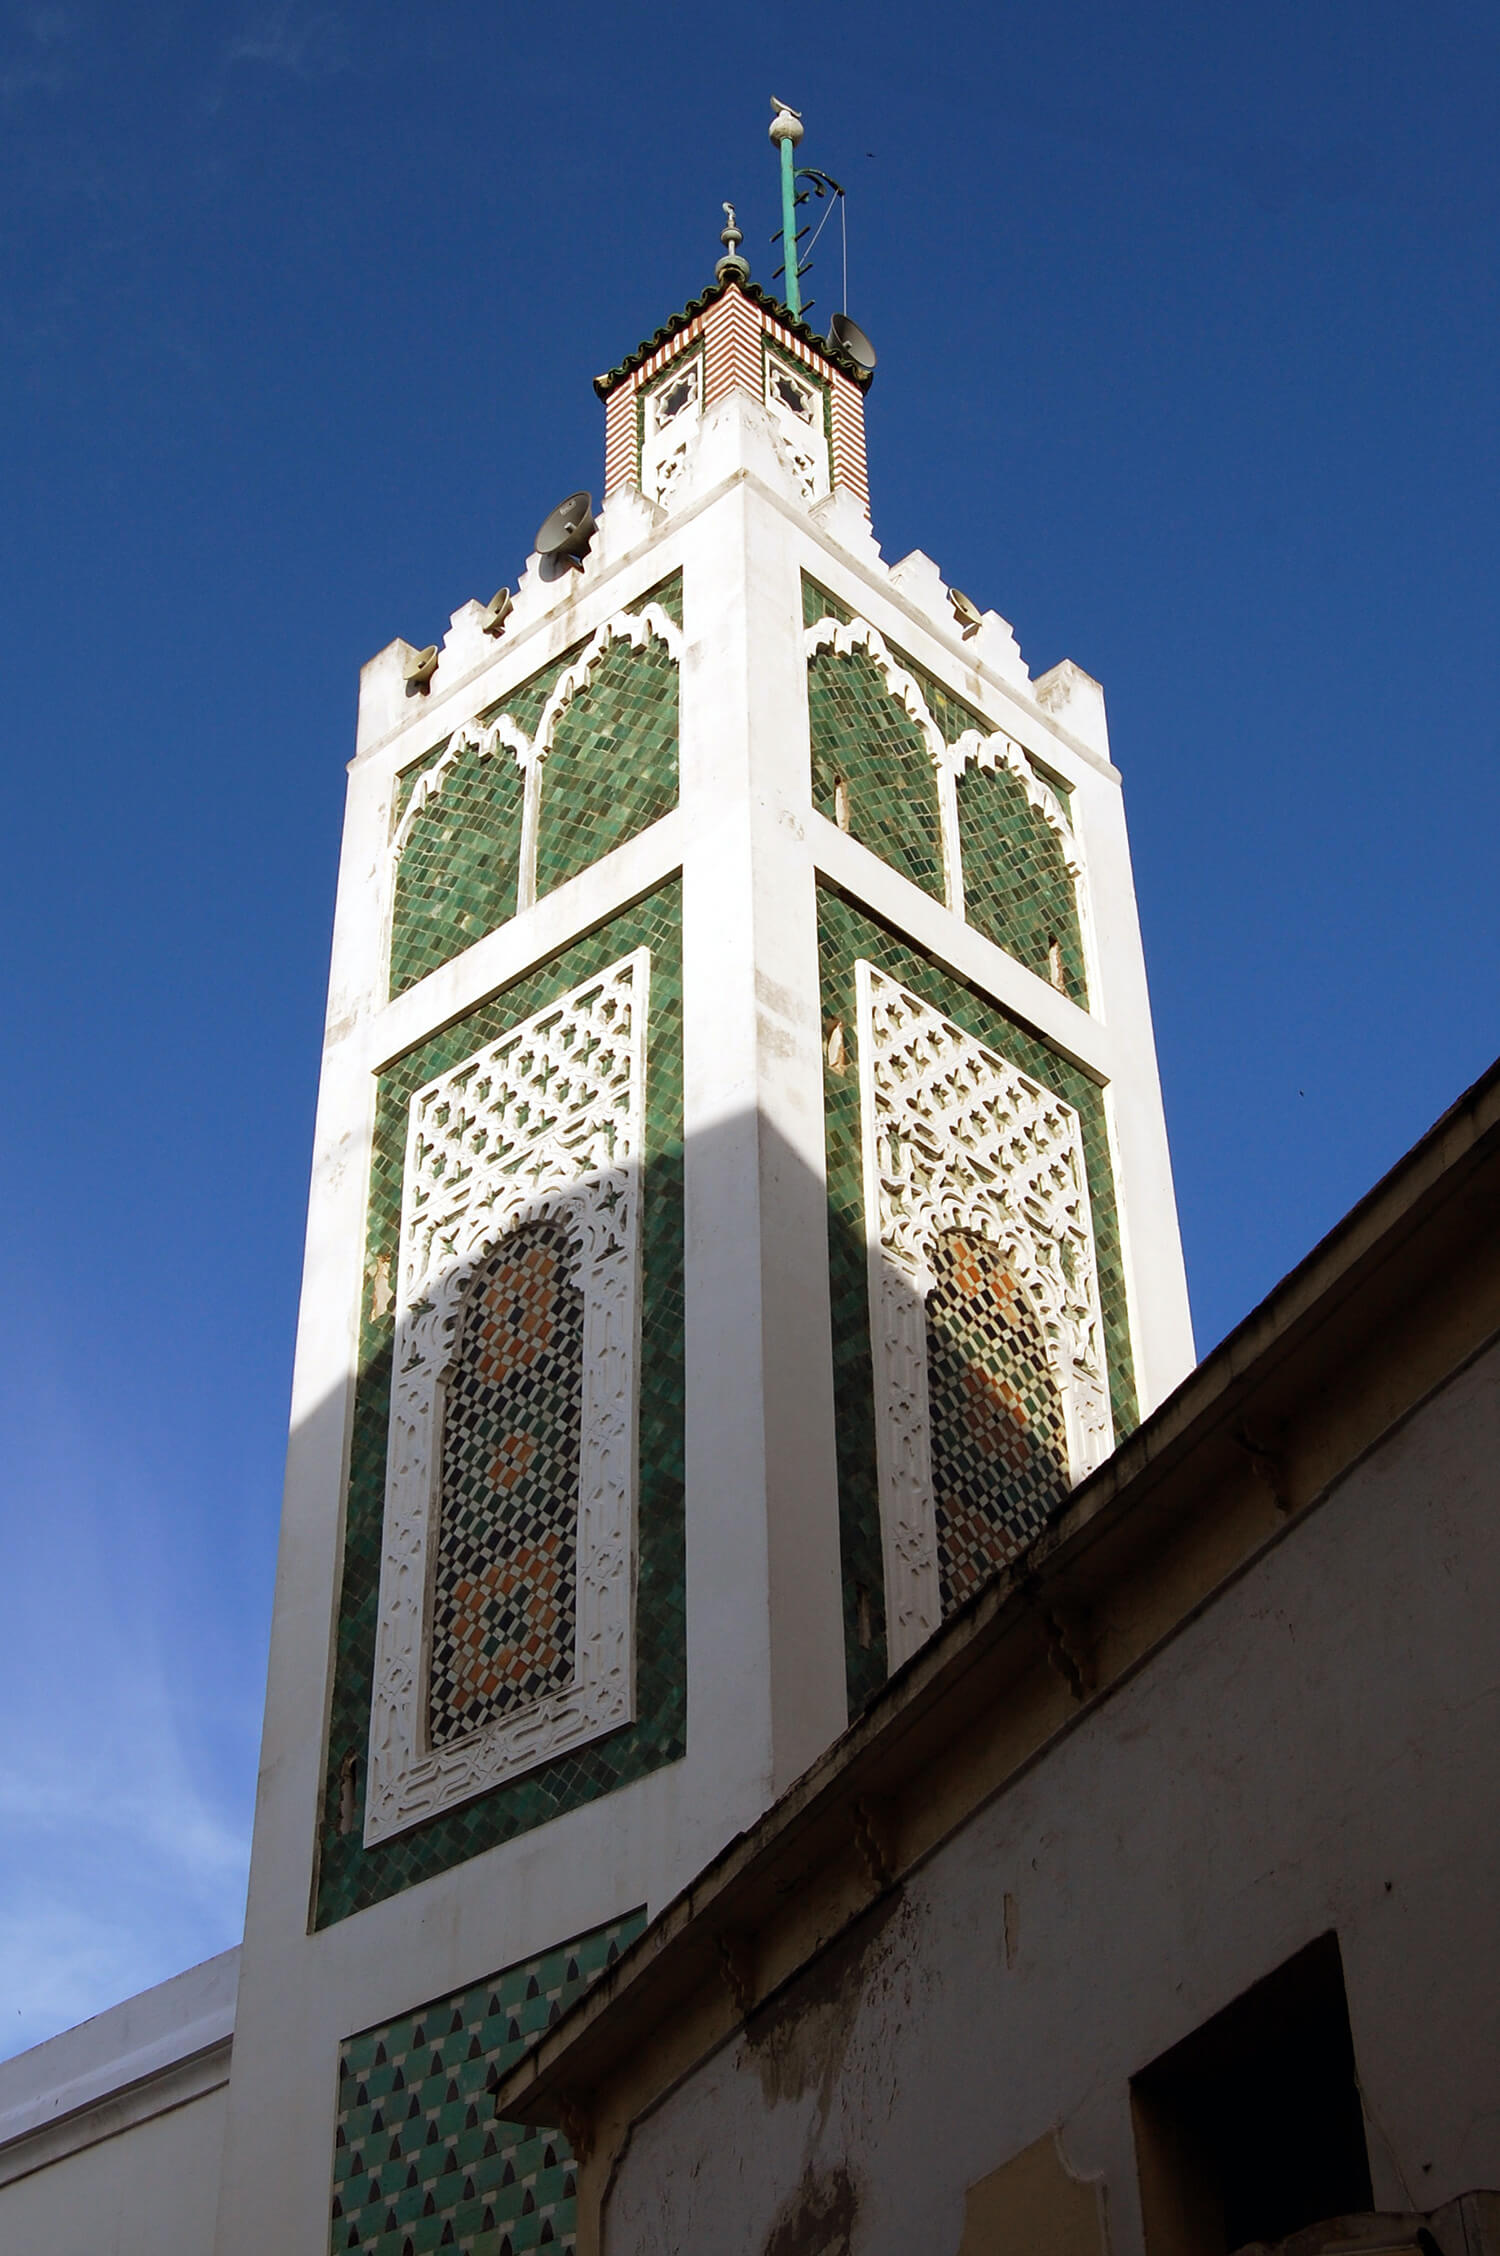 Sahara Desert Tour - What to Do and See in Tangier - The Exciting Port City of Morocco - Grand Mosque